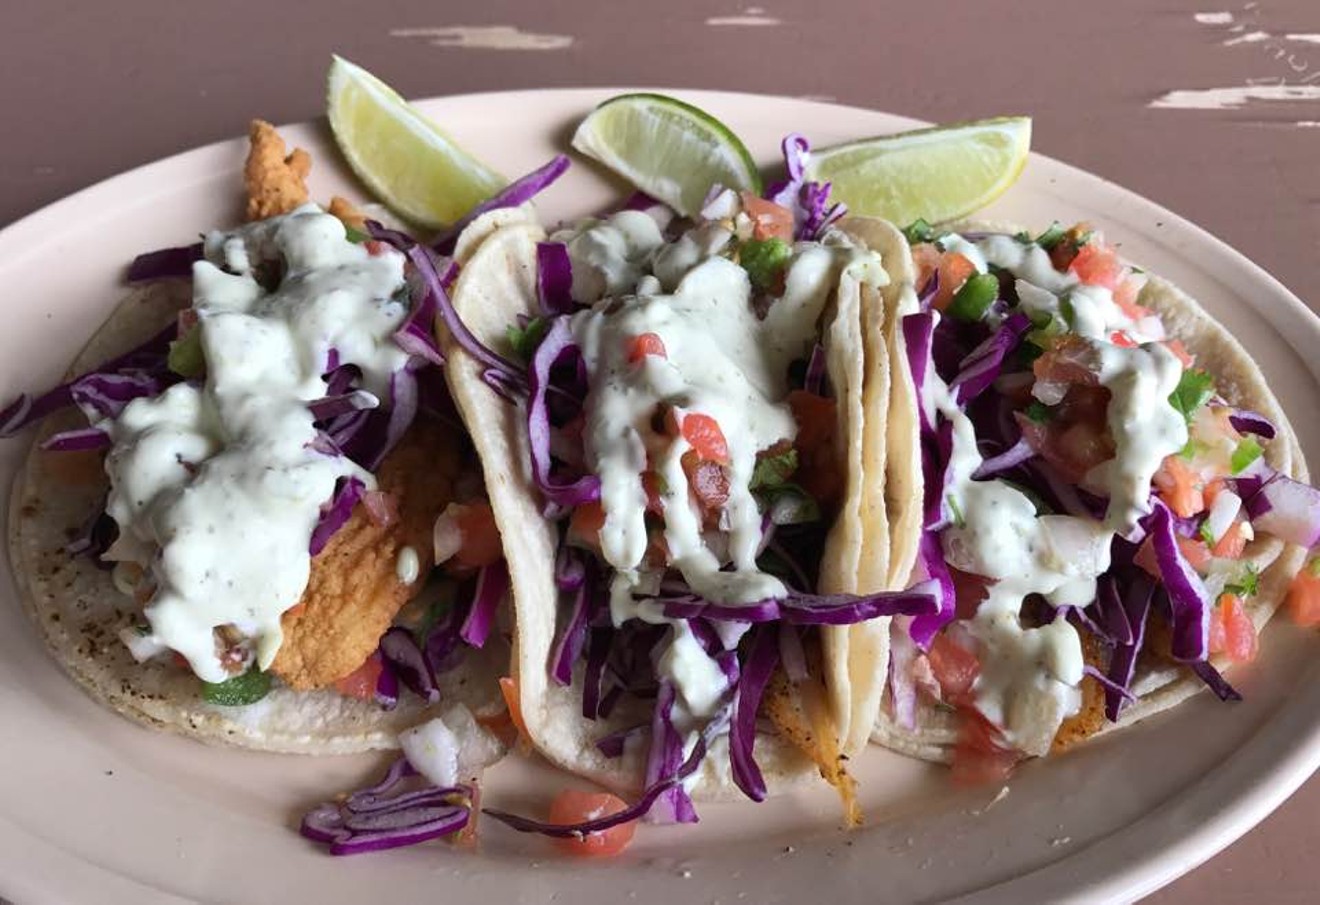 Creamy, crunchy catfish tacos from Joe Lee's Seafood Kitchen.